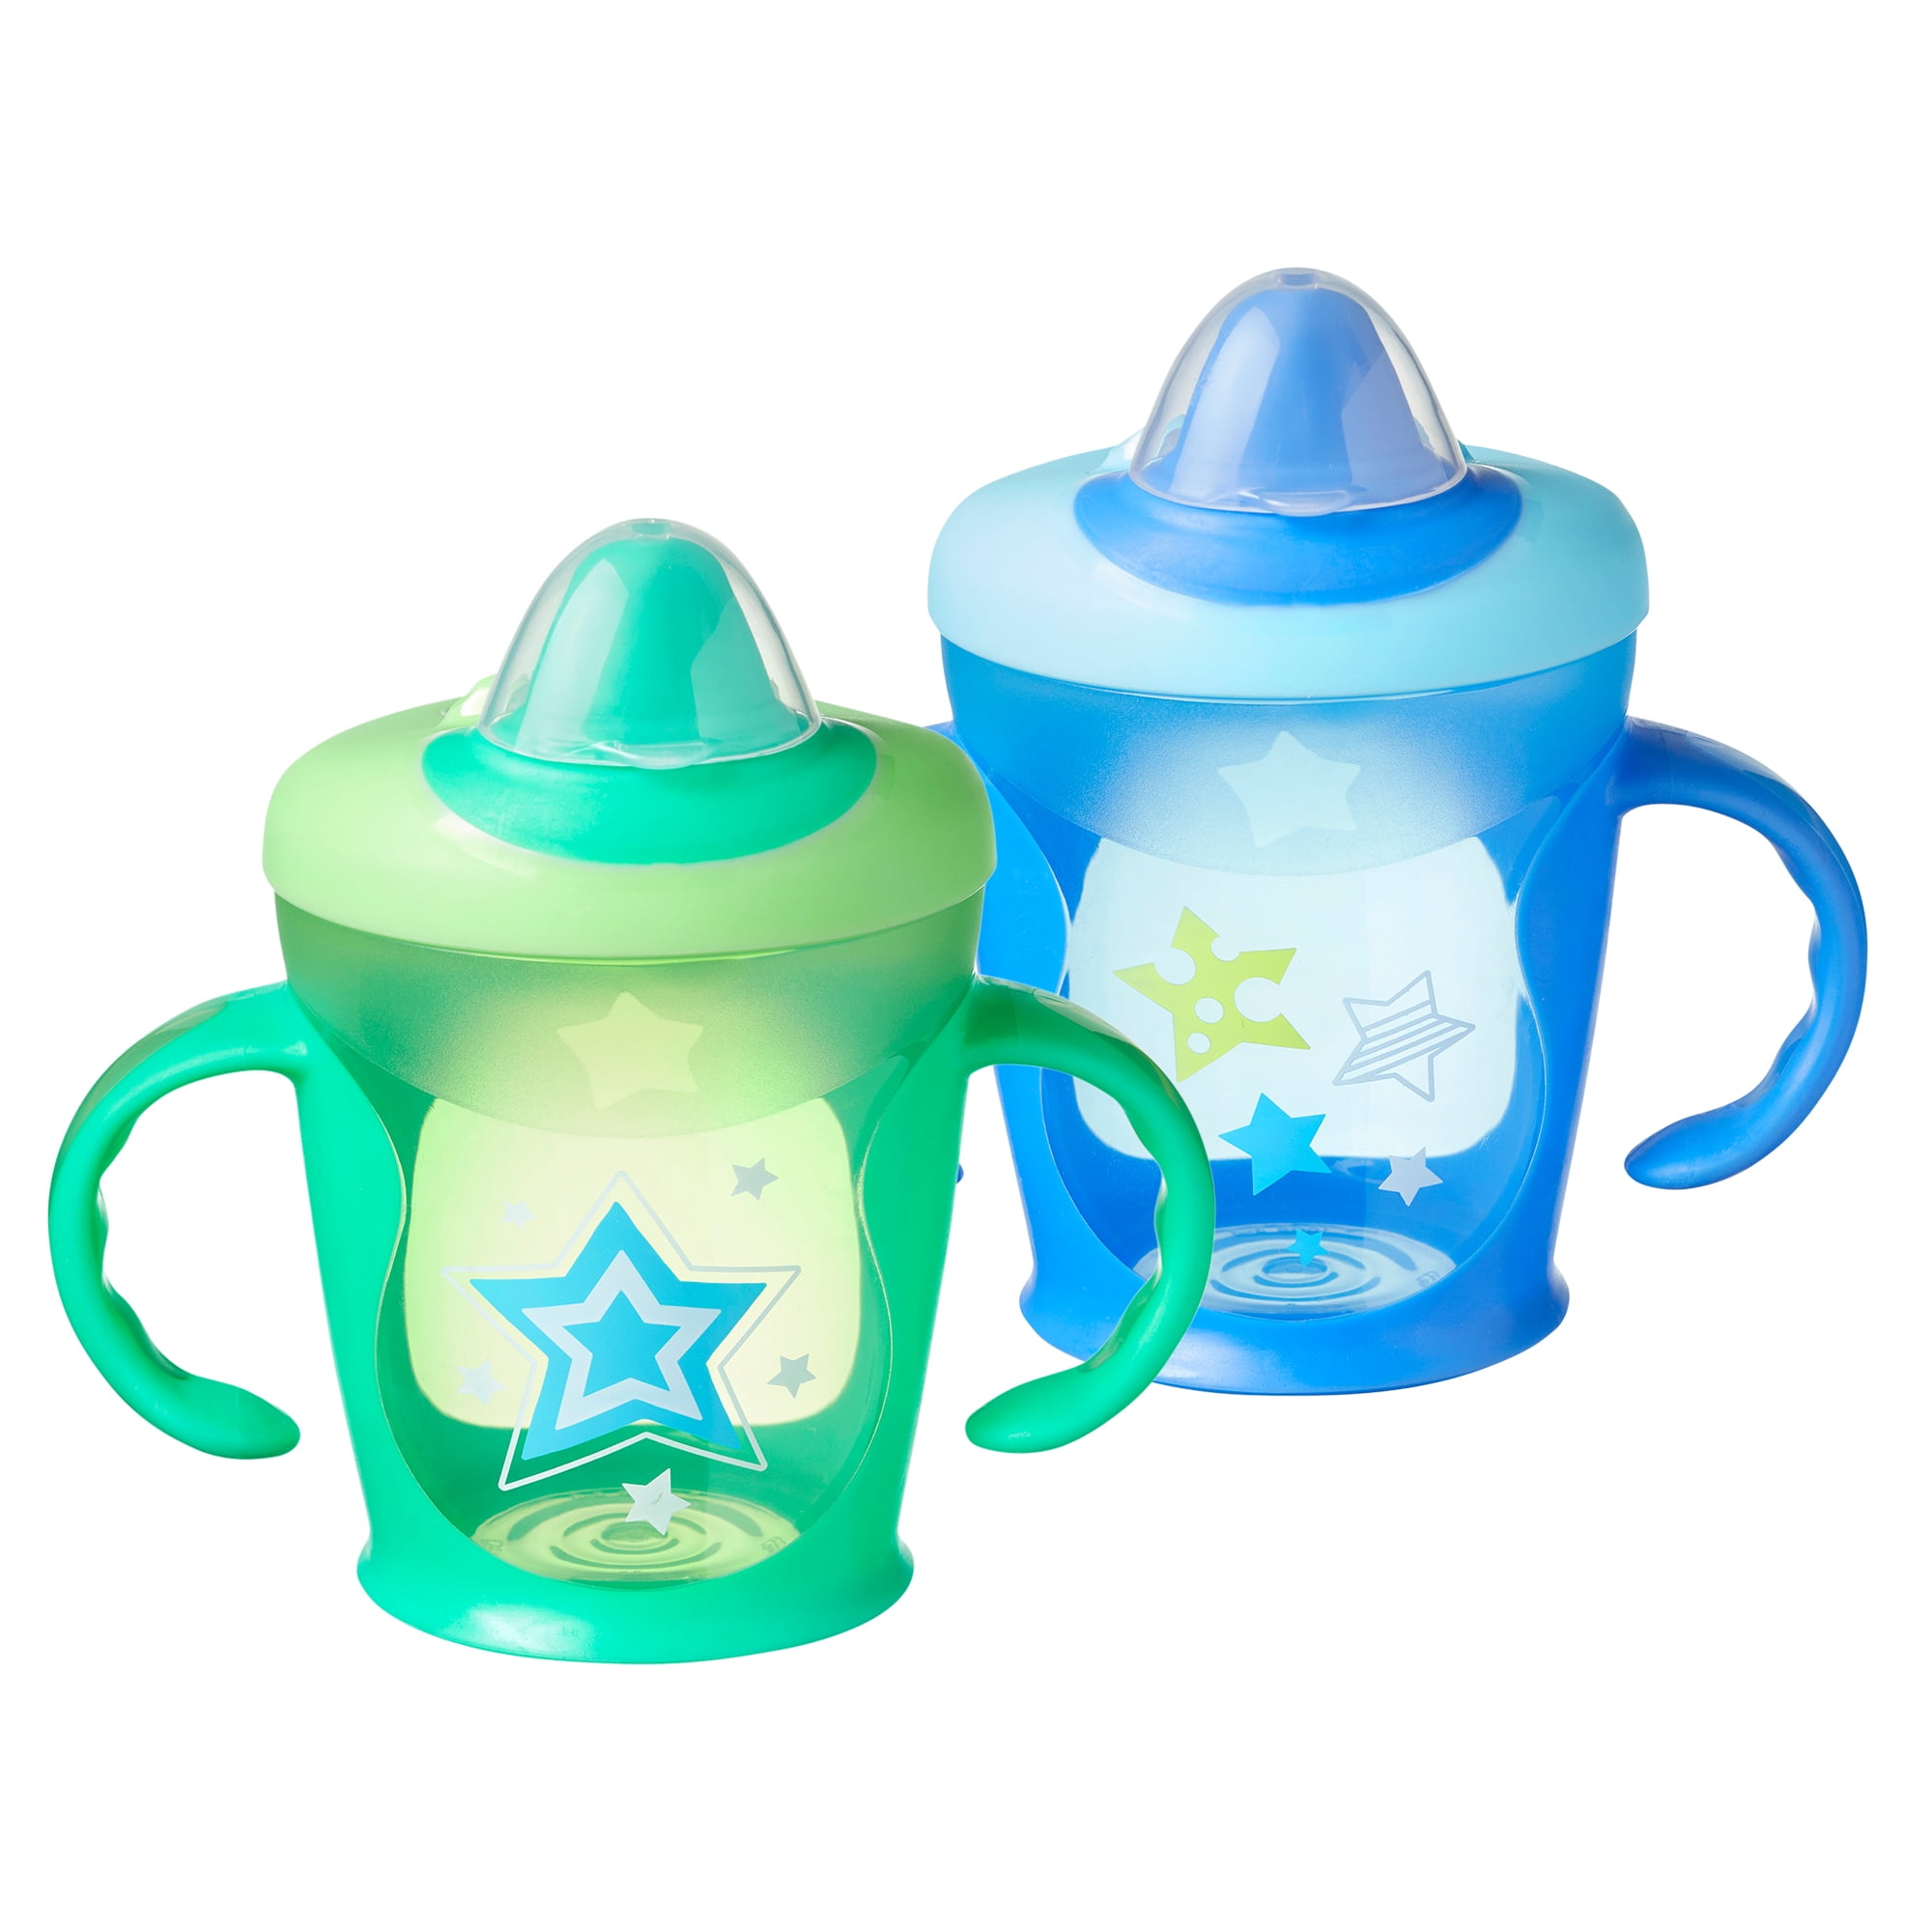 Tommee Tippee Explora Truly Spill Proof Sippy Cup Review